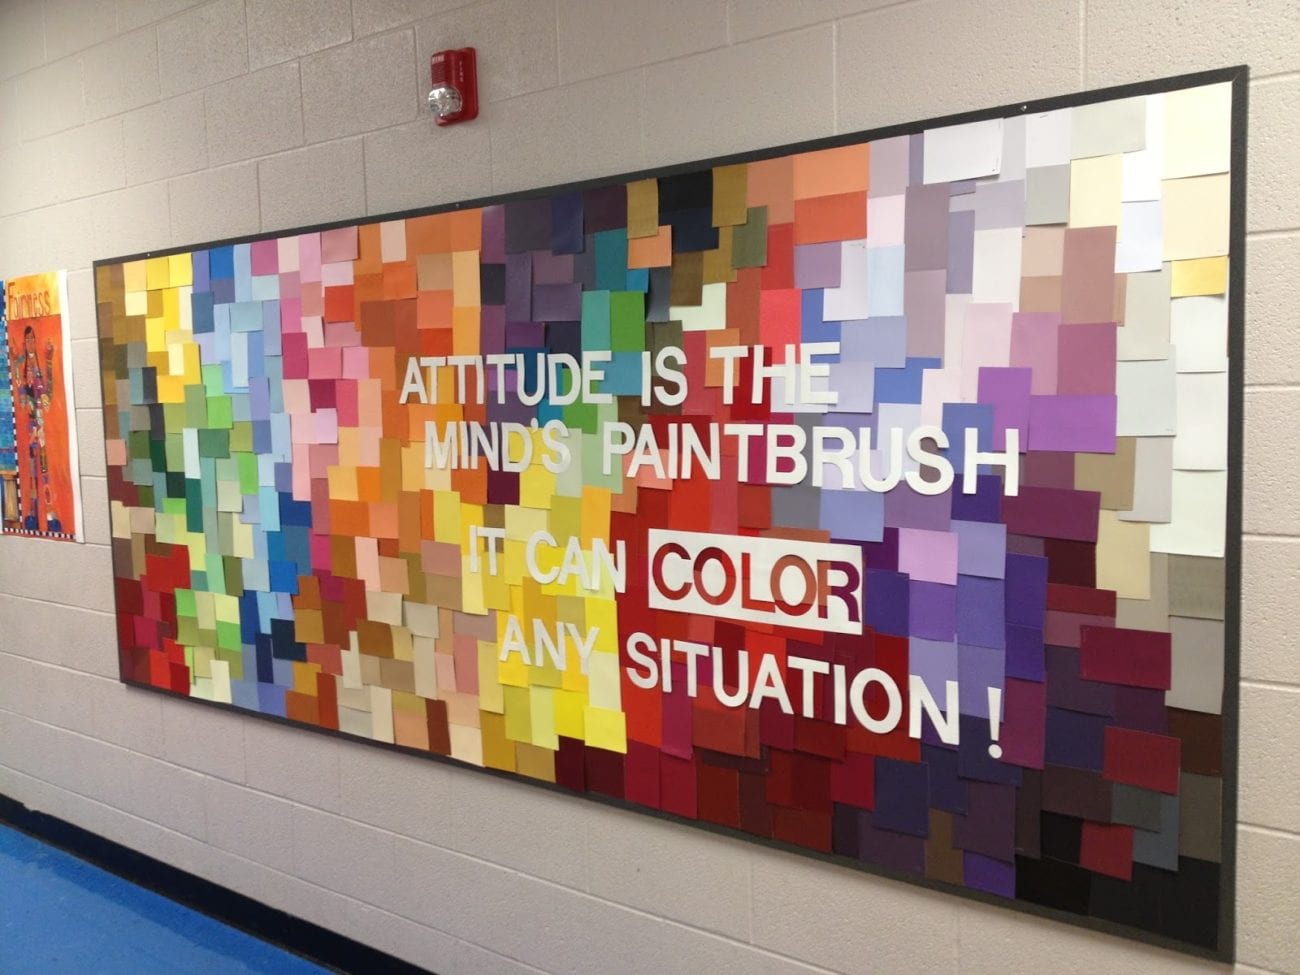 Rainbow bulletin board using paint swatches. The board says 